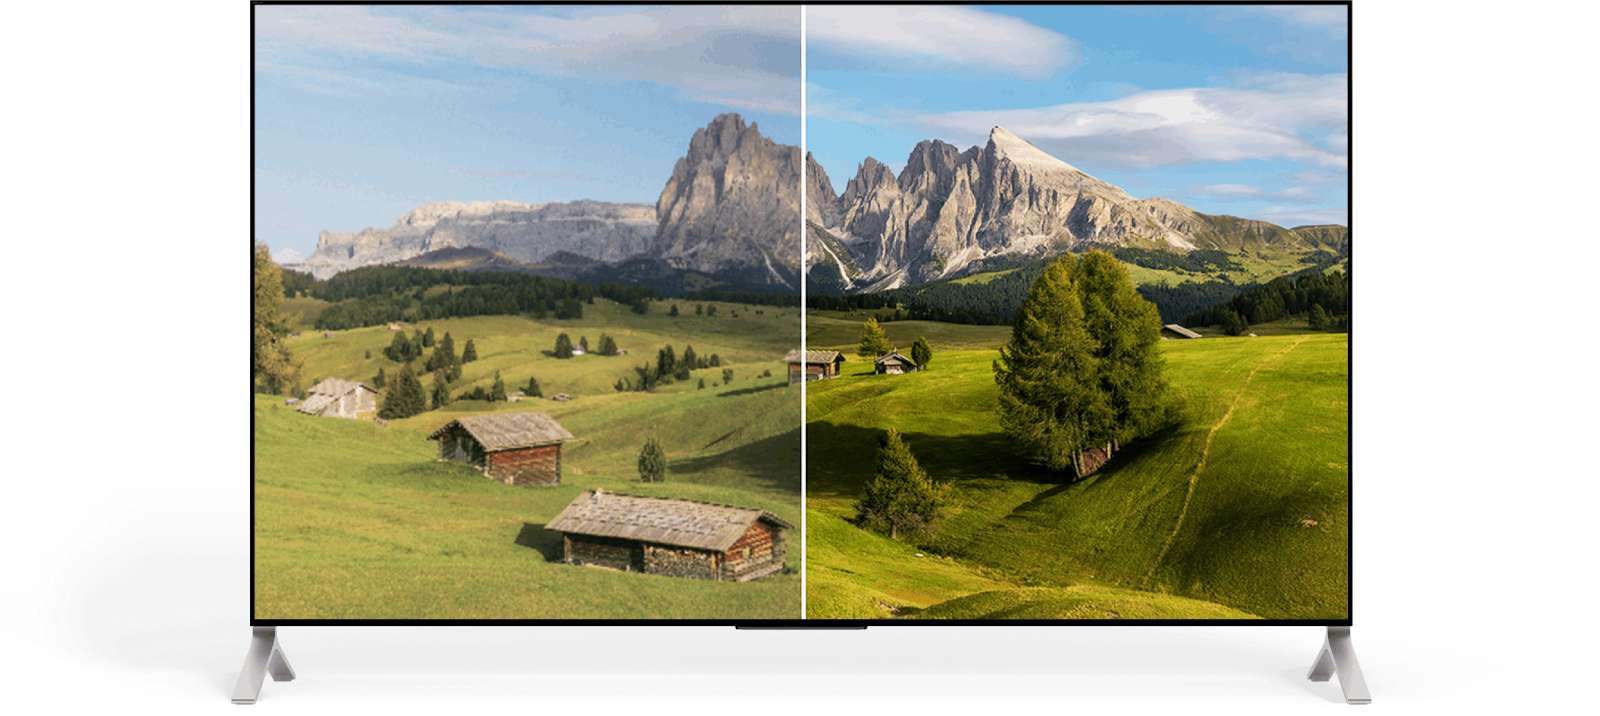 The difference between 4K and Full HD